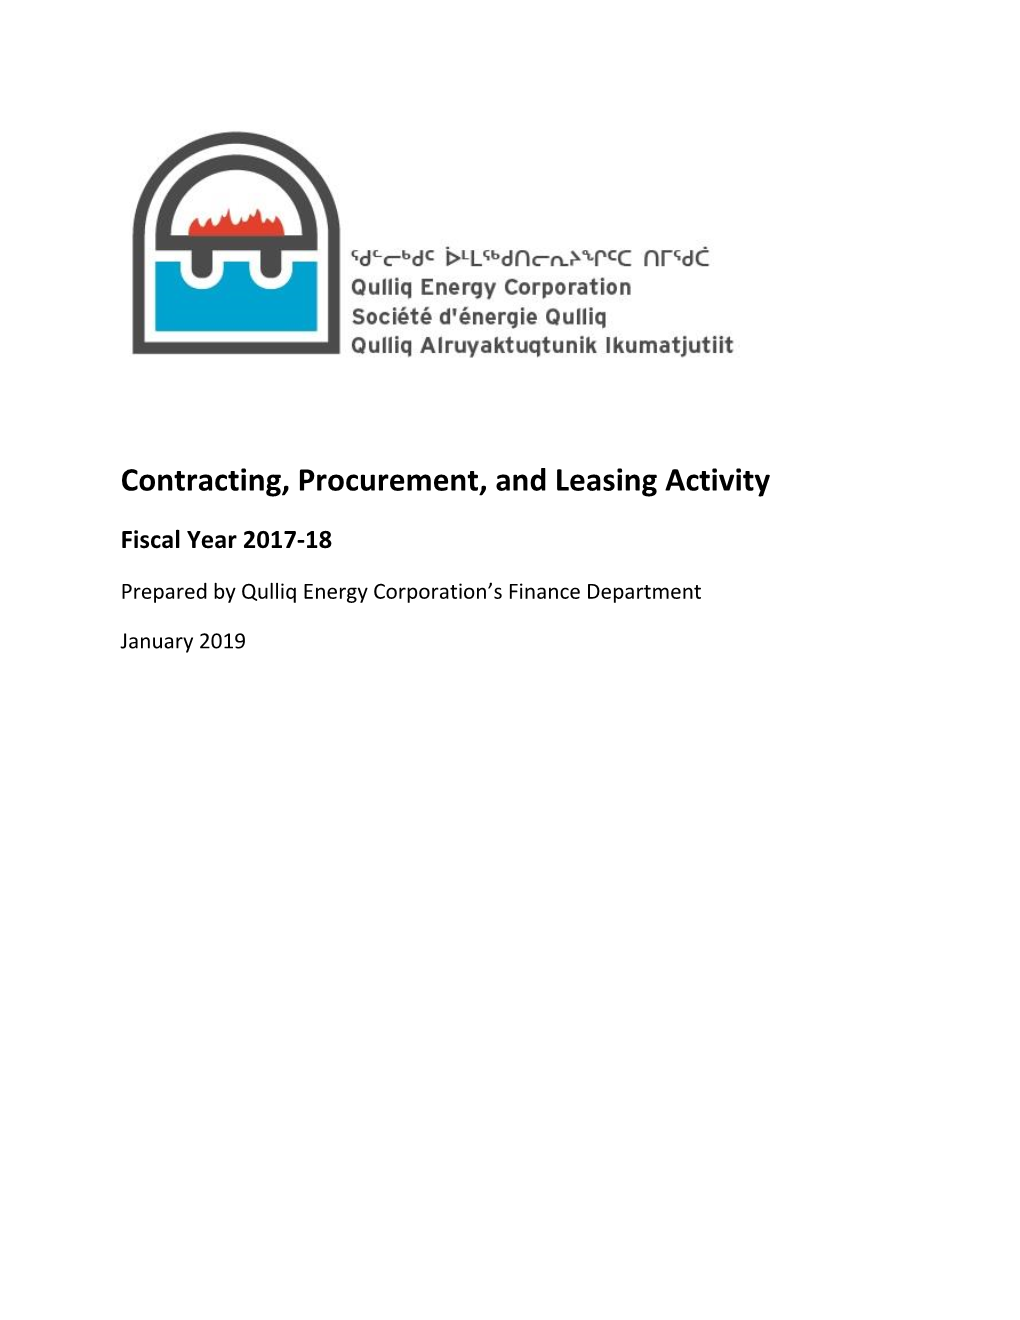 QEC Contracting, Procurement, and Leasing Activity Fiscal Year 2017